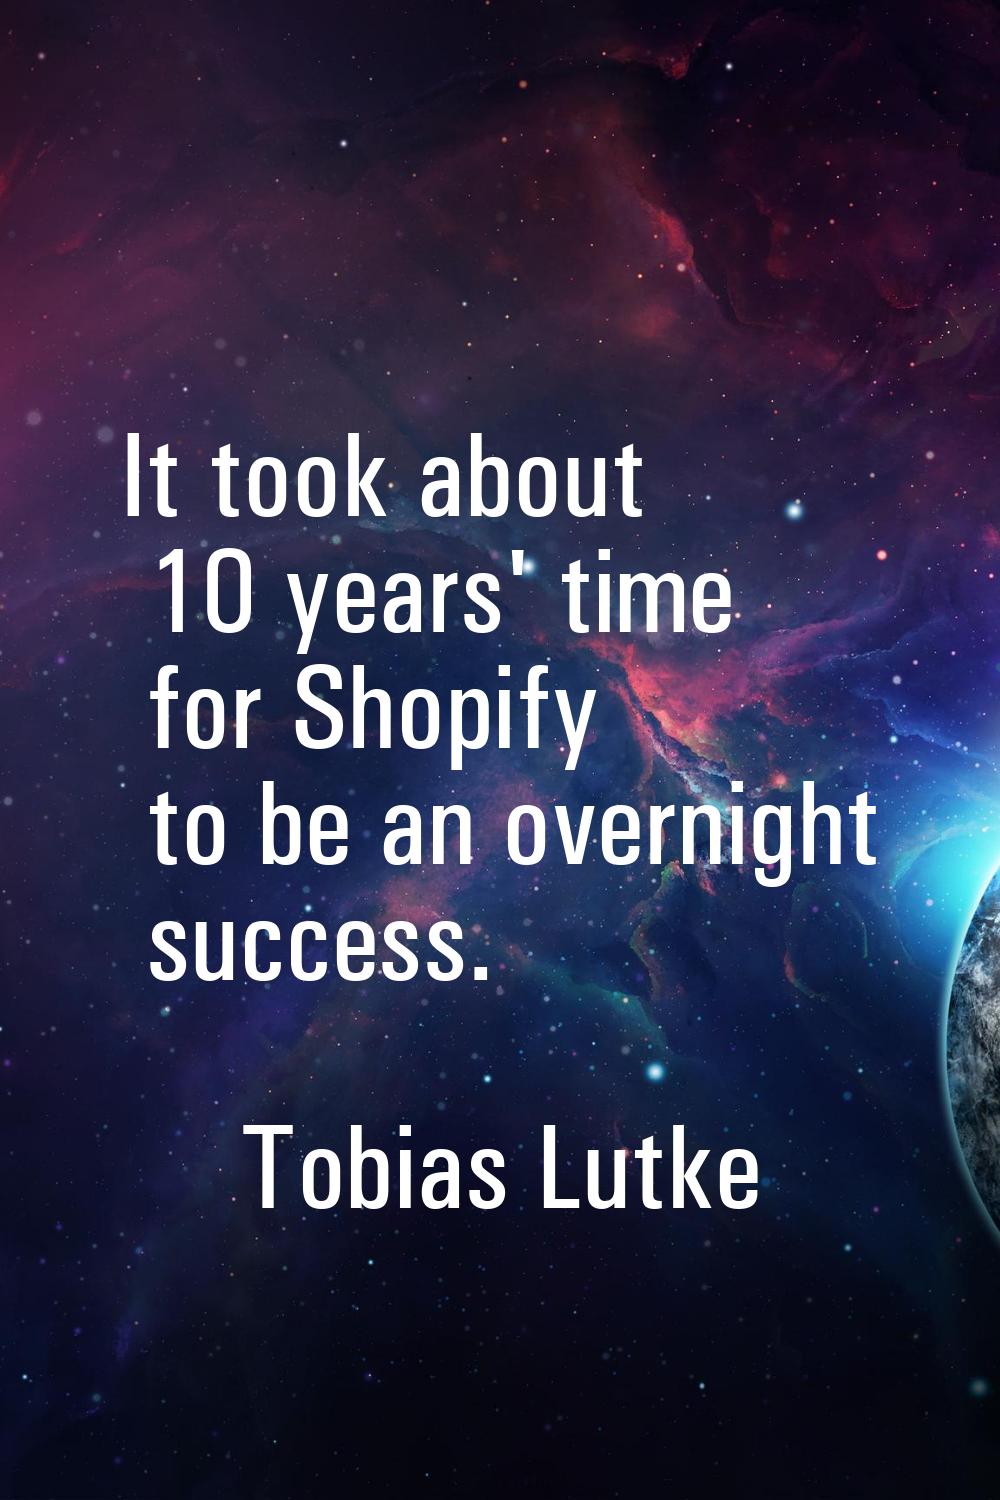 It took about 10 years' time for Shopify to be an overnight success.